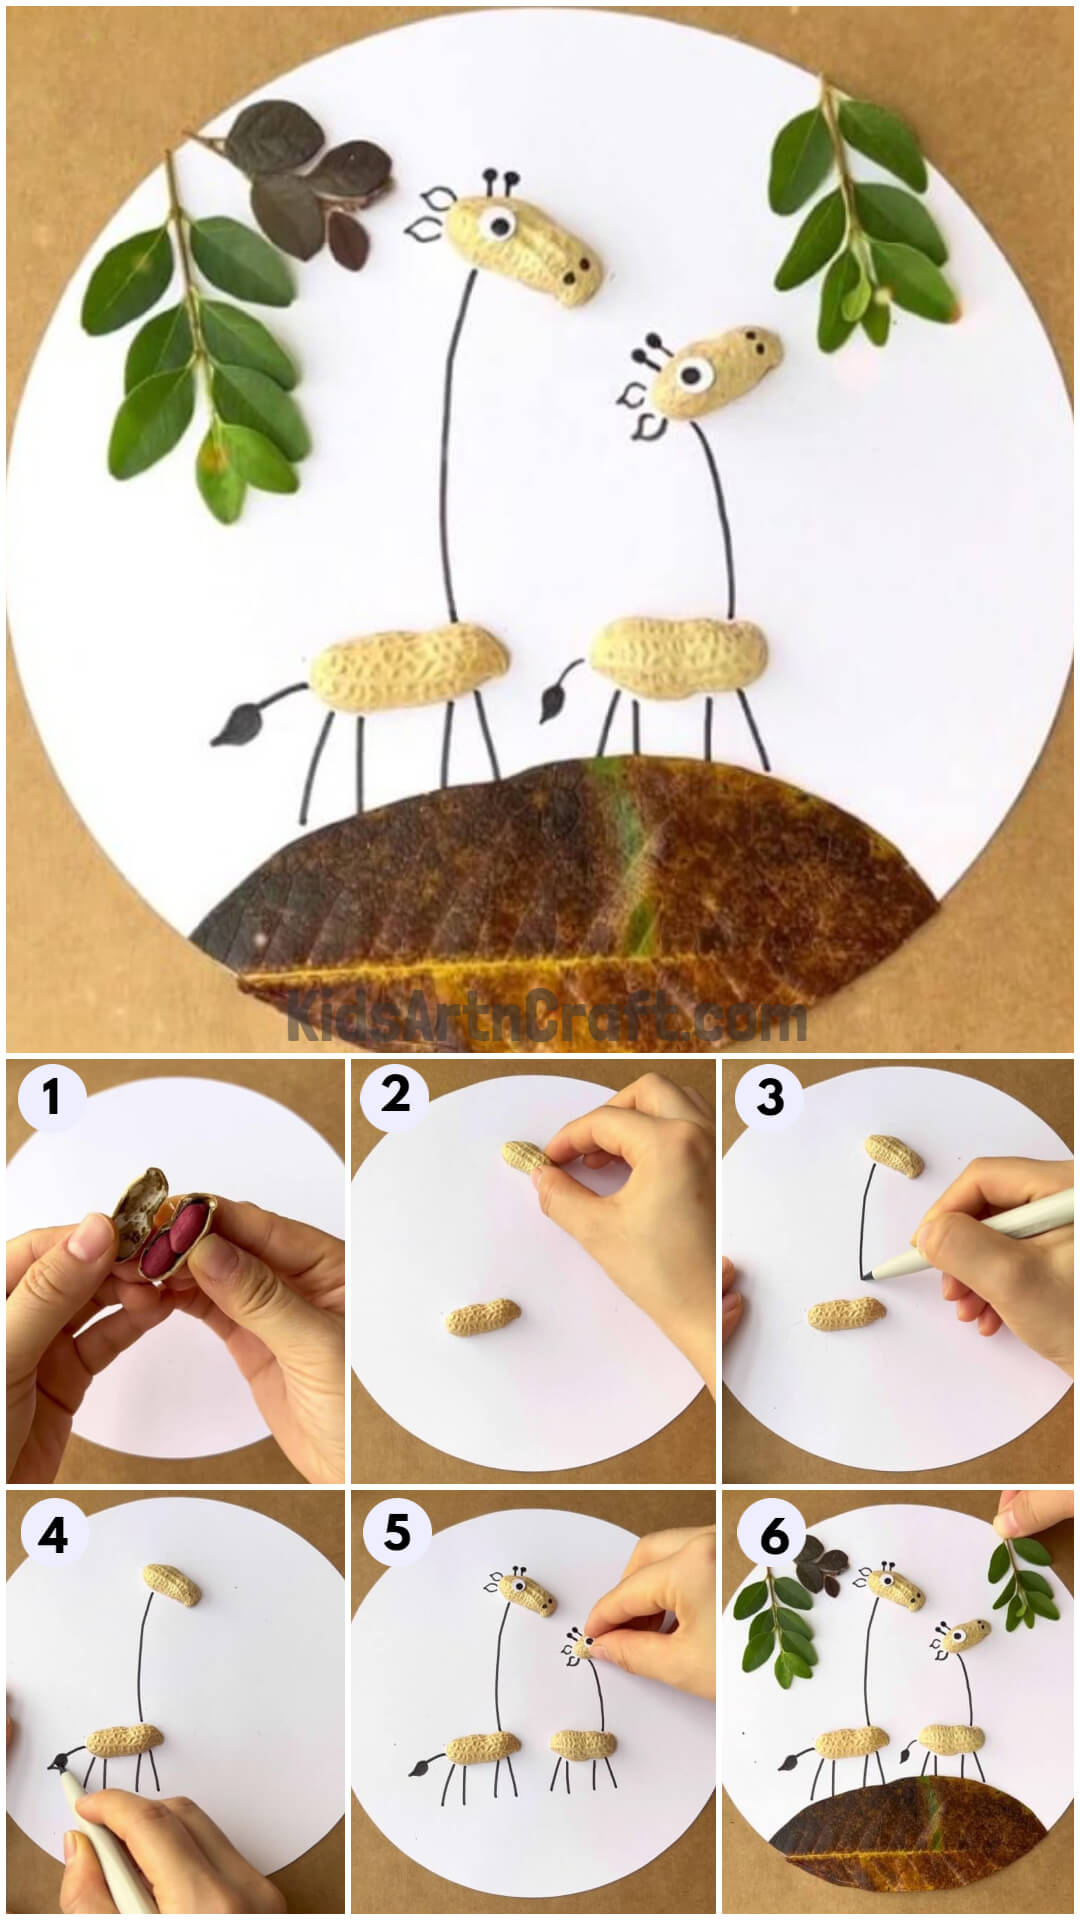 Recycled Giraffe Art and Craft Using Fall Leaves and Peanut Shells